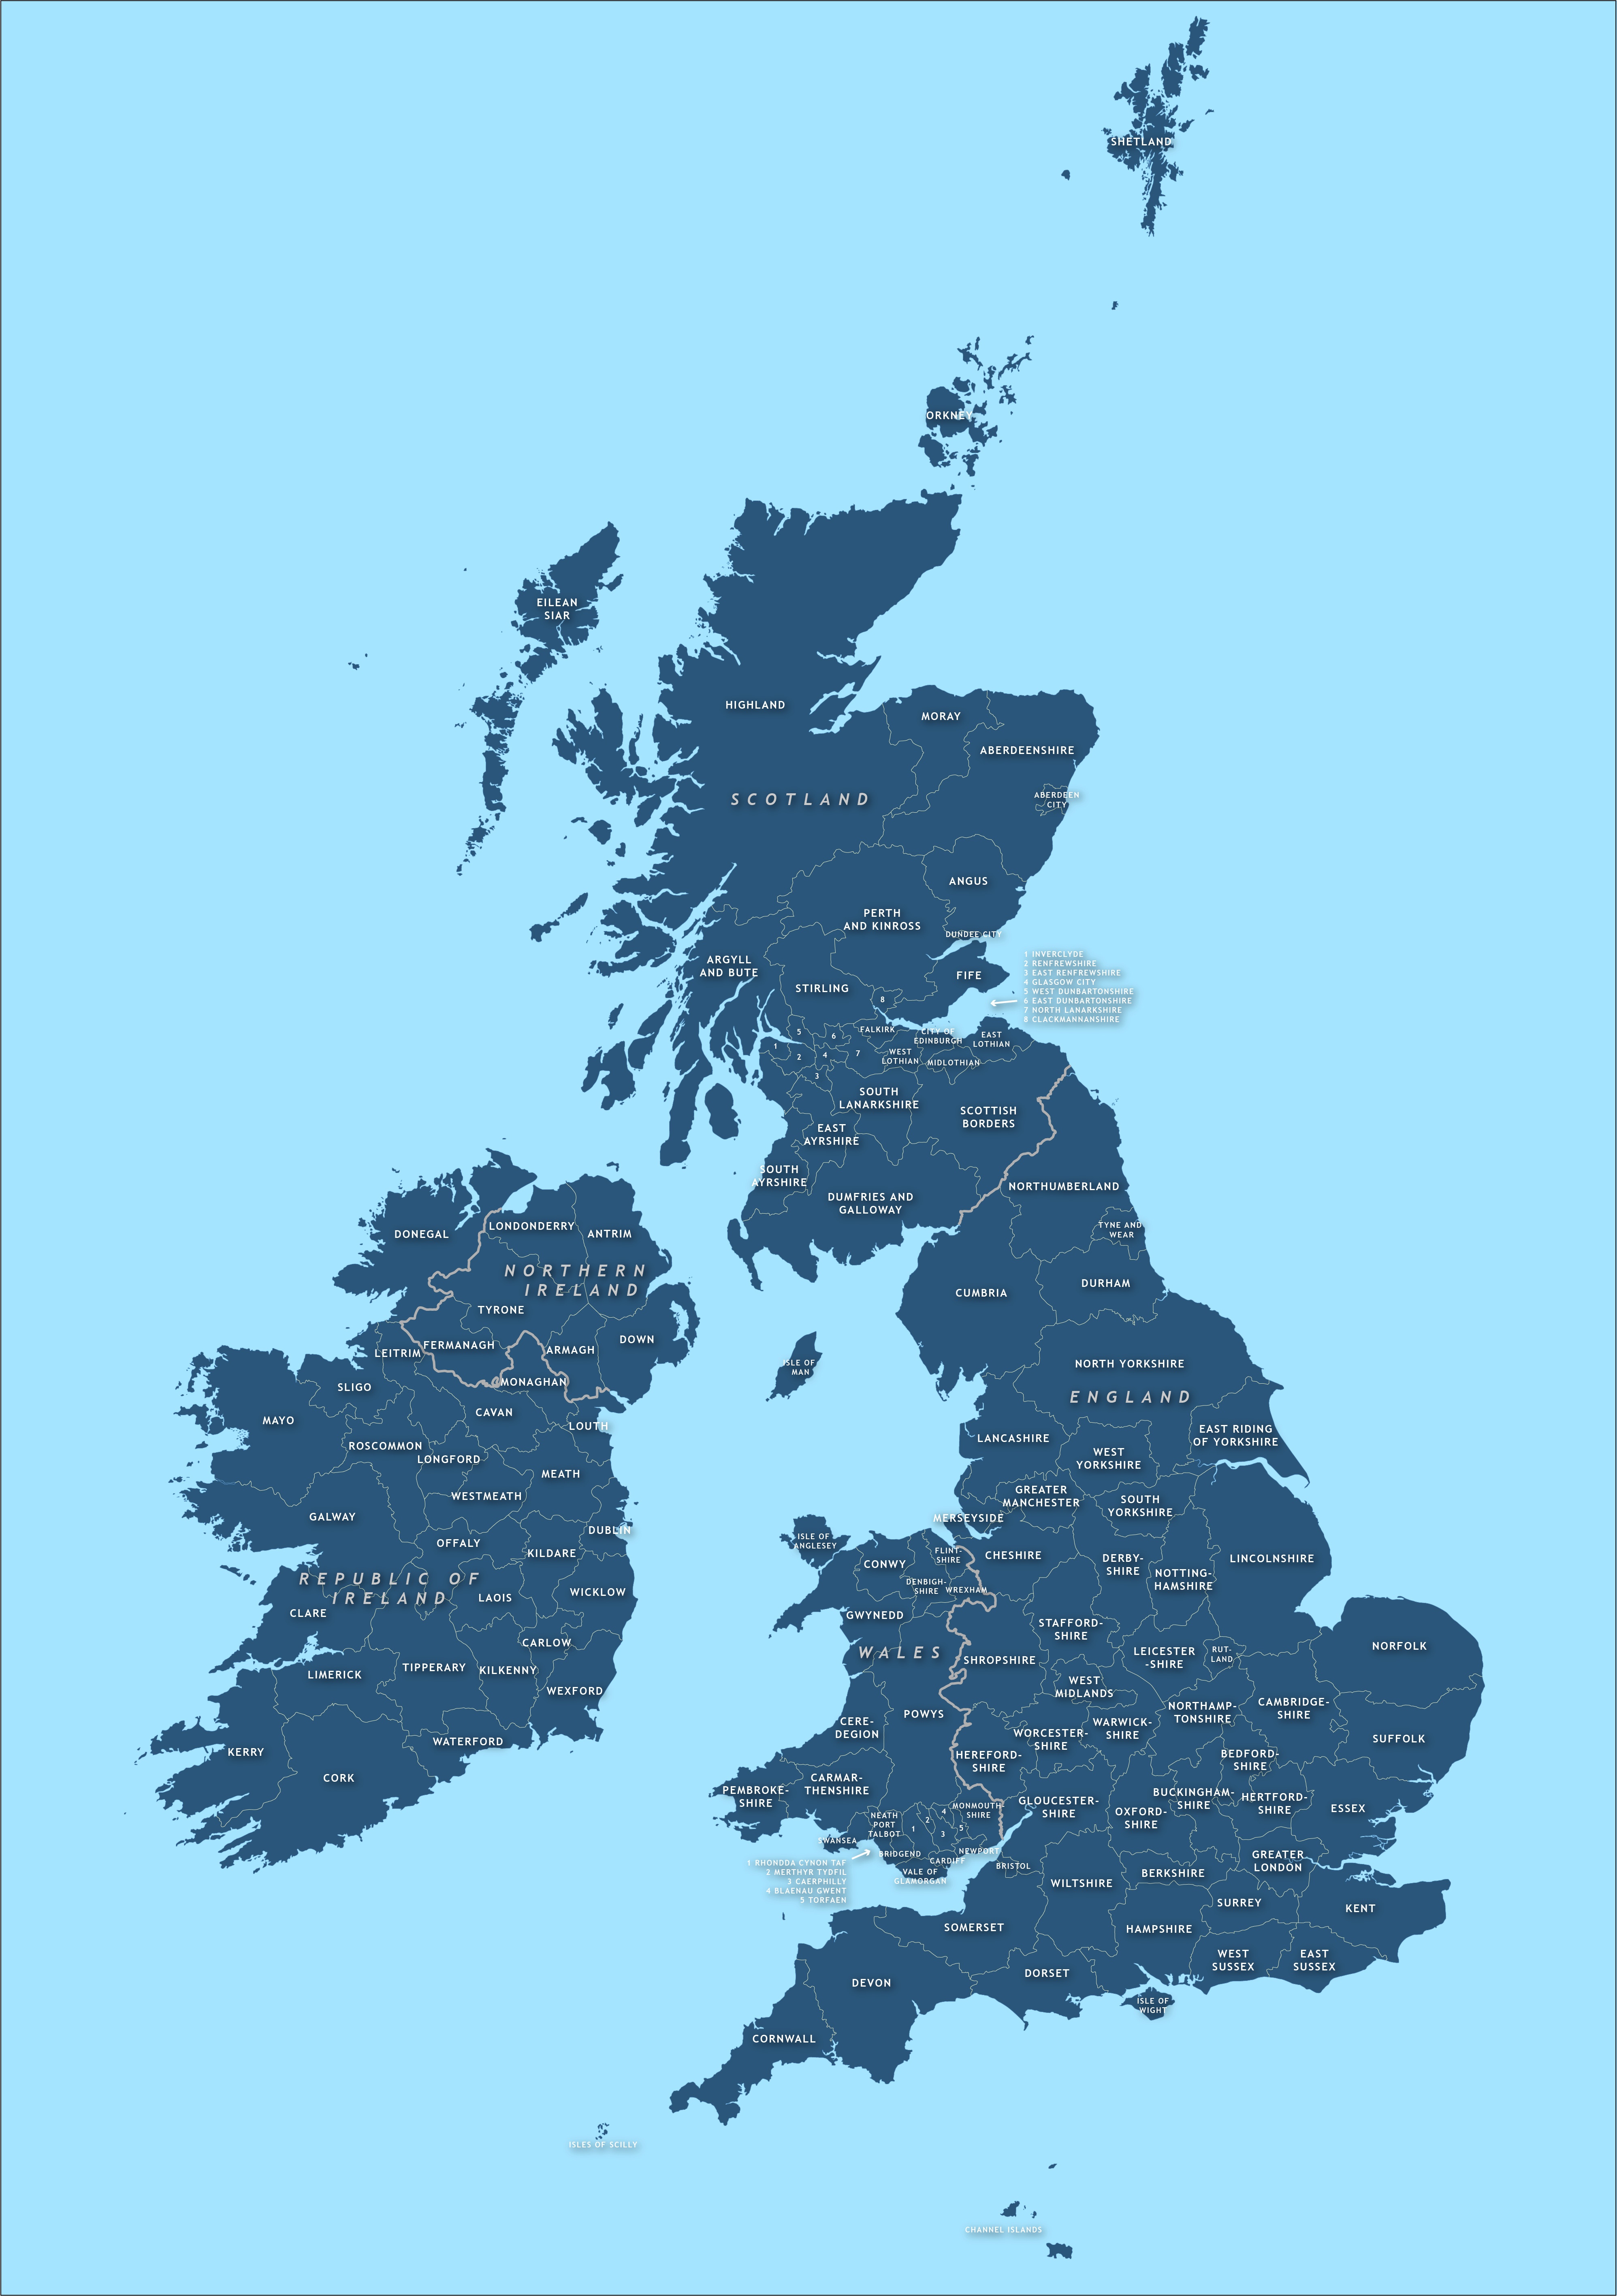 County Map Of Britain And Ireland - Royalty Free Vector Map - Maproom - Free Printable Map Of Uk And Ireland